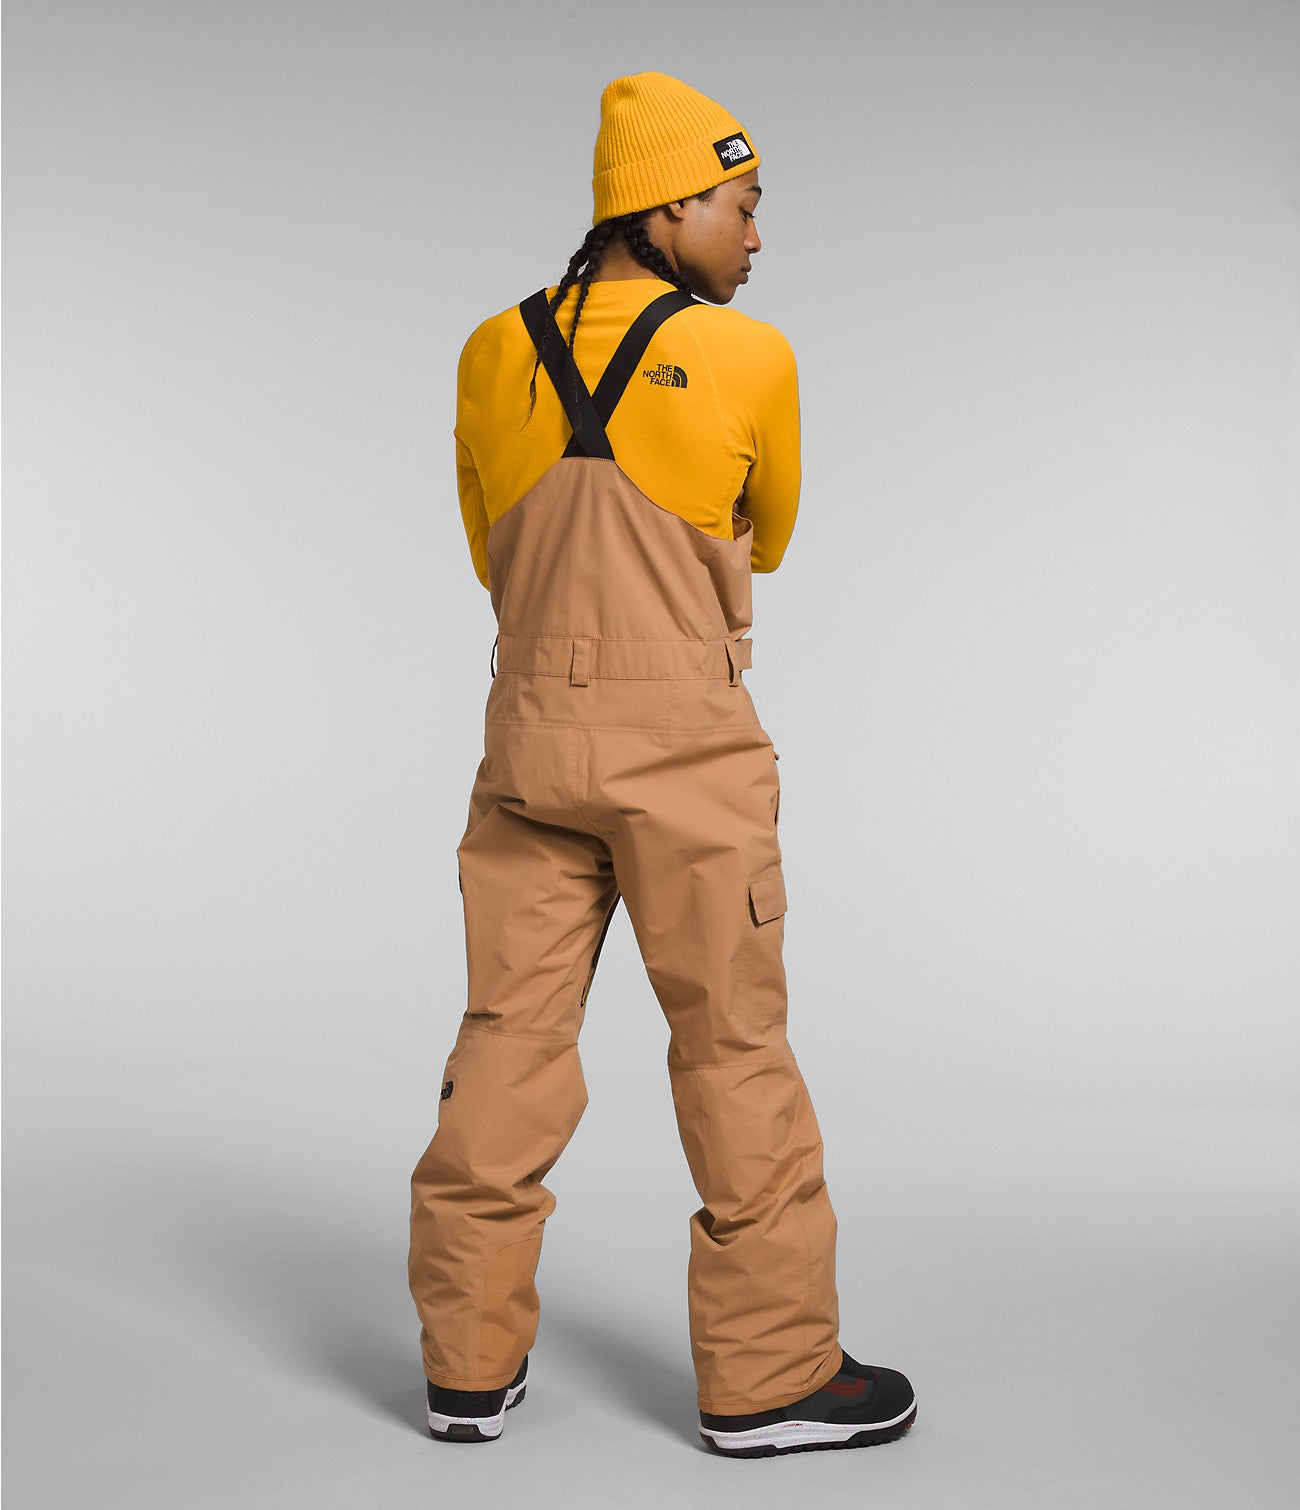 The North Face Freedom Bibs - Men's